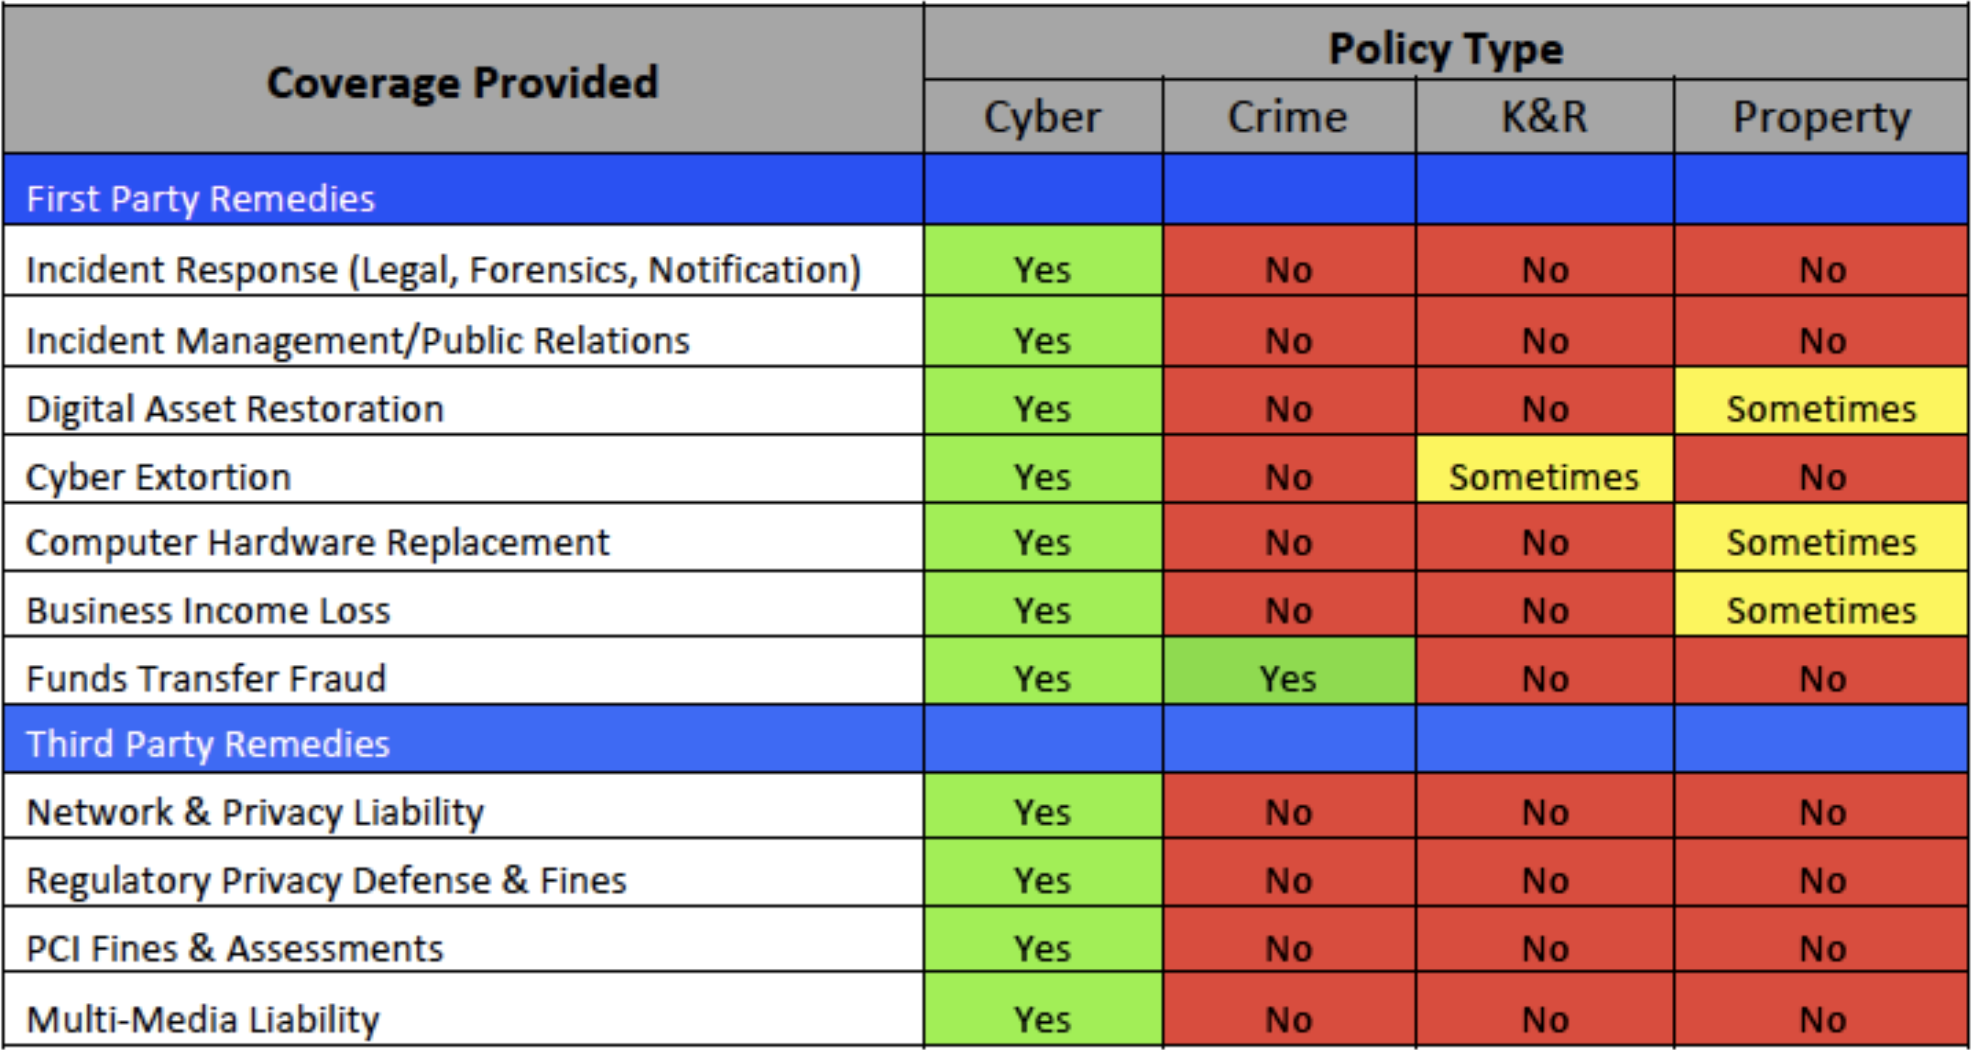 image table showing cyber insurance coverage and policy types